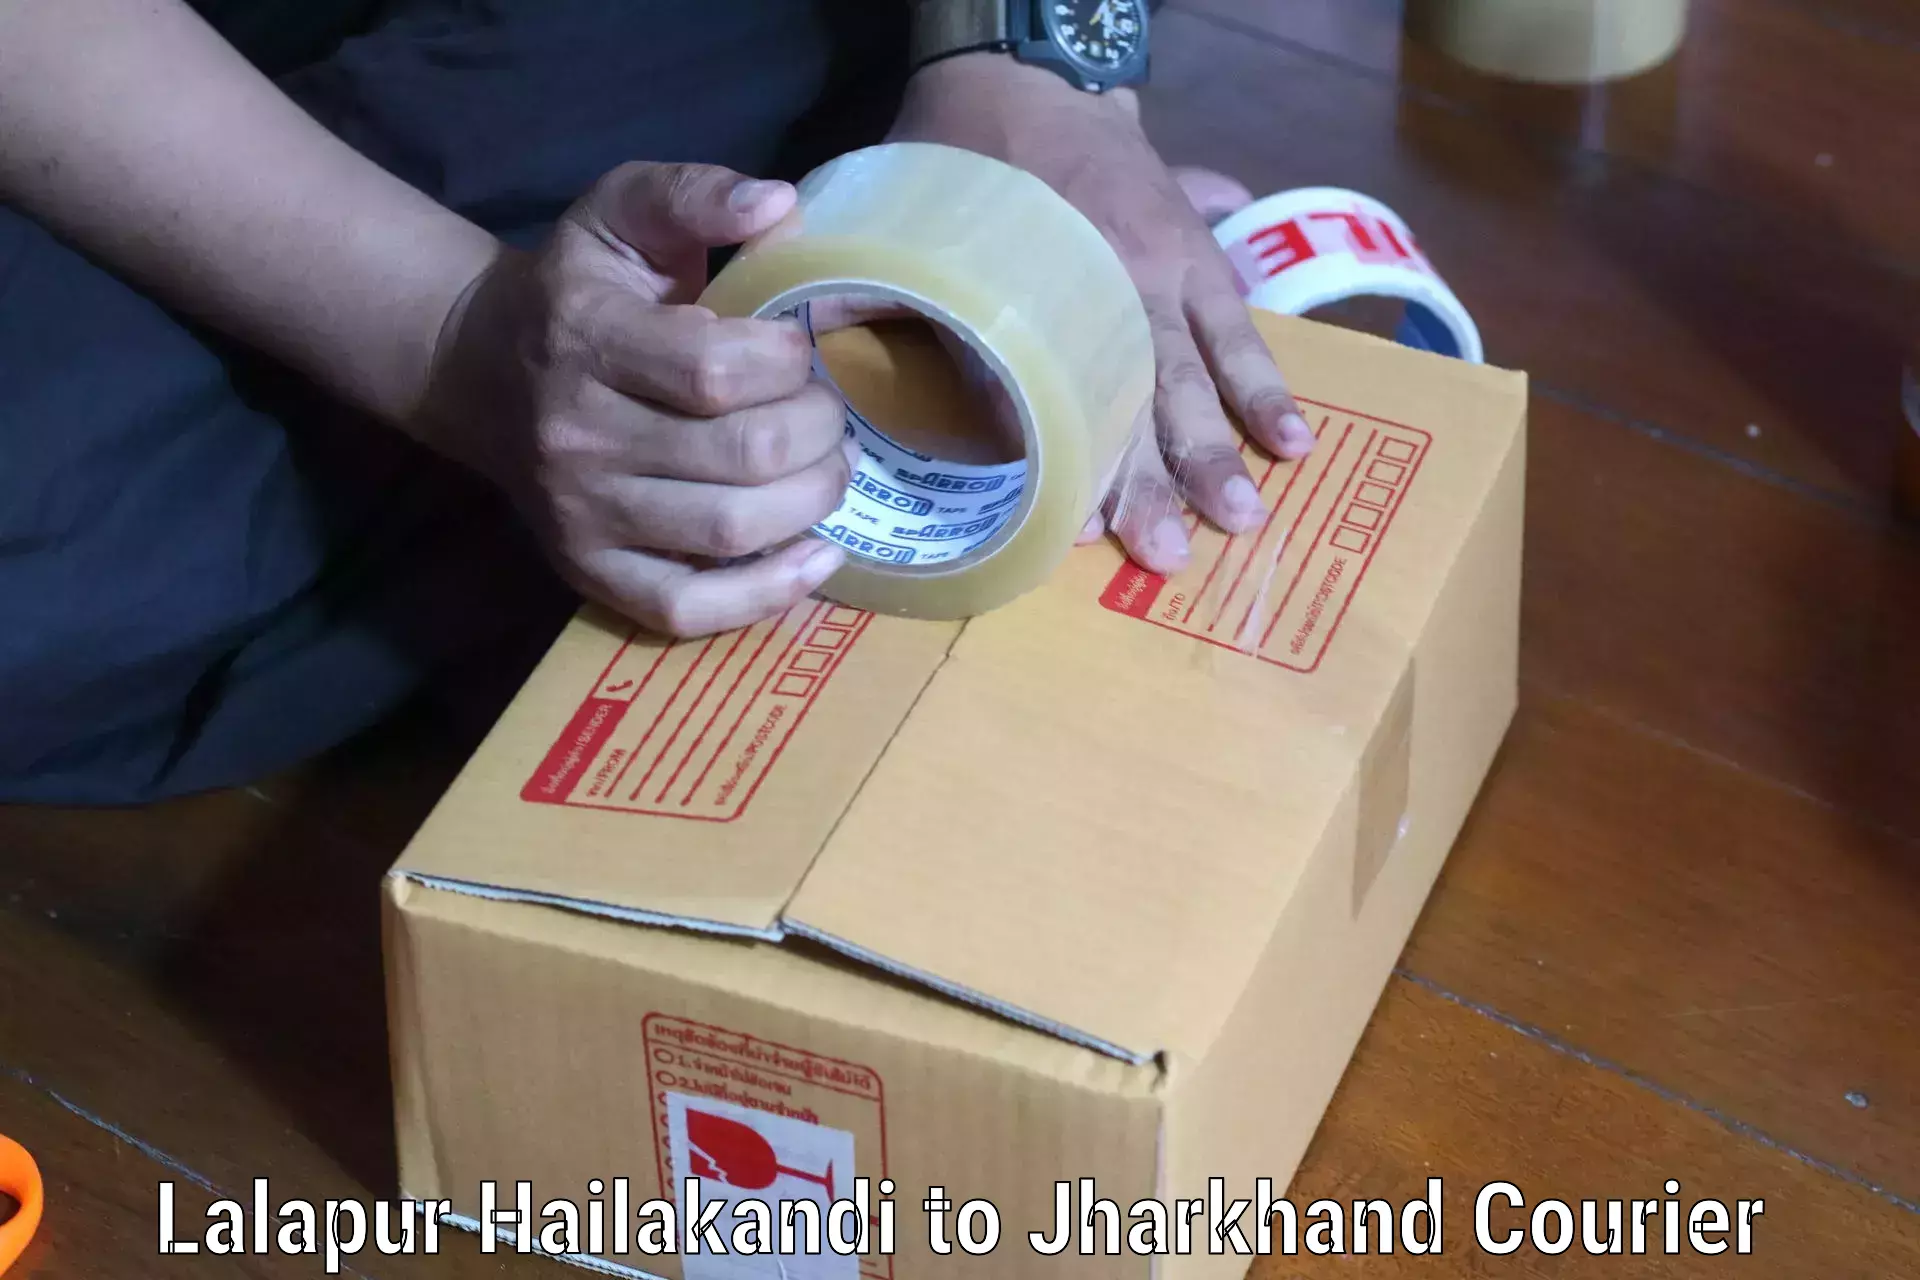 State-of-the-art courier technology Lalapur Hailakandi to Khunti